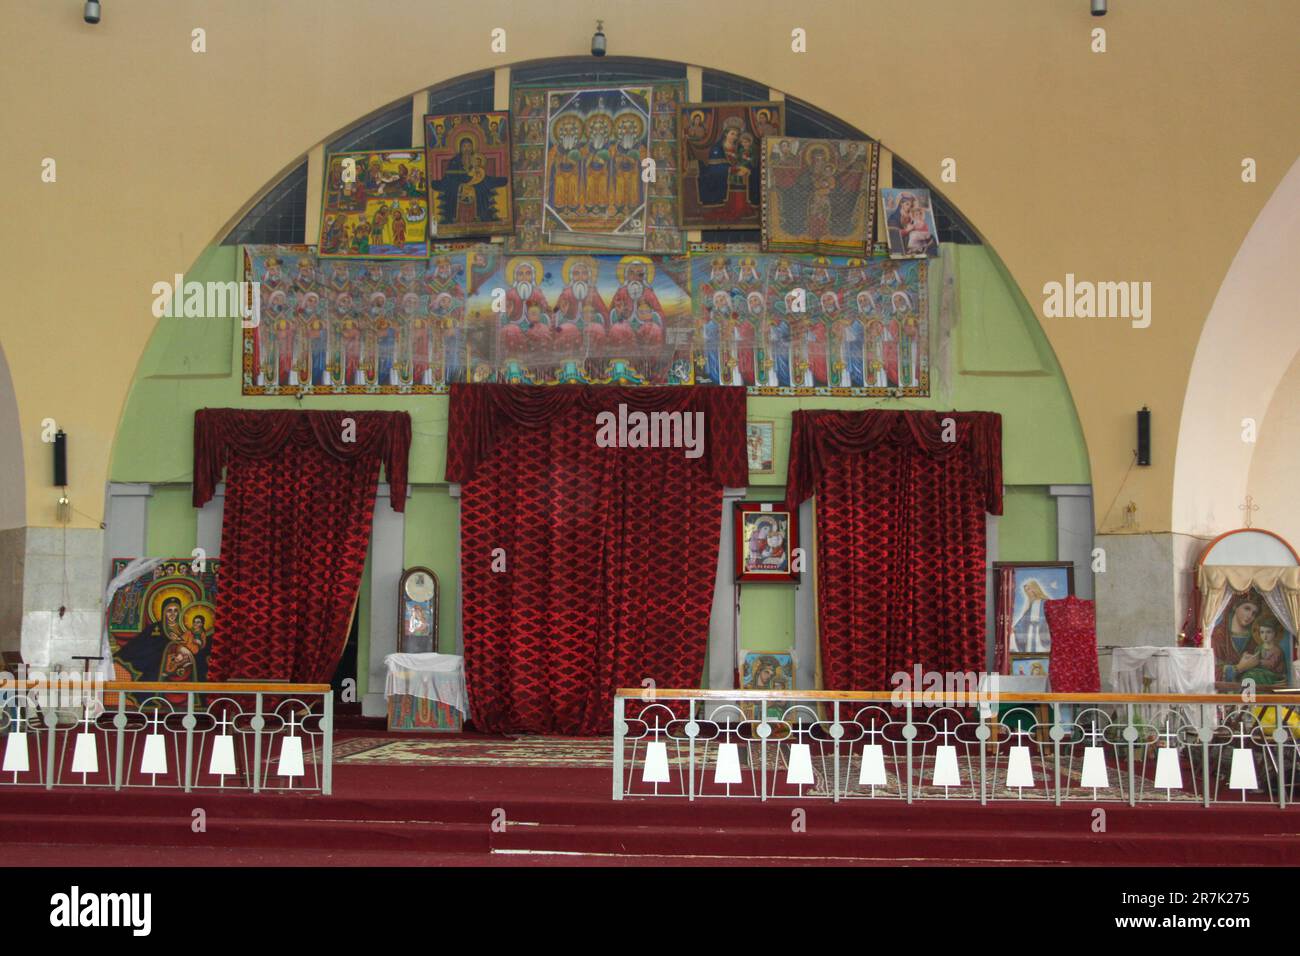 Africa, Ethiopia, Axum, Interior of The Church of Our Lady Mary of Zion said to houses the Biblical Ark of the Covenant. Stock Photo